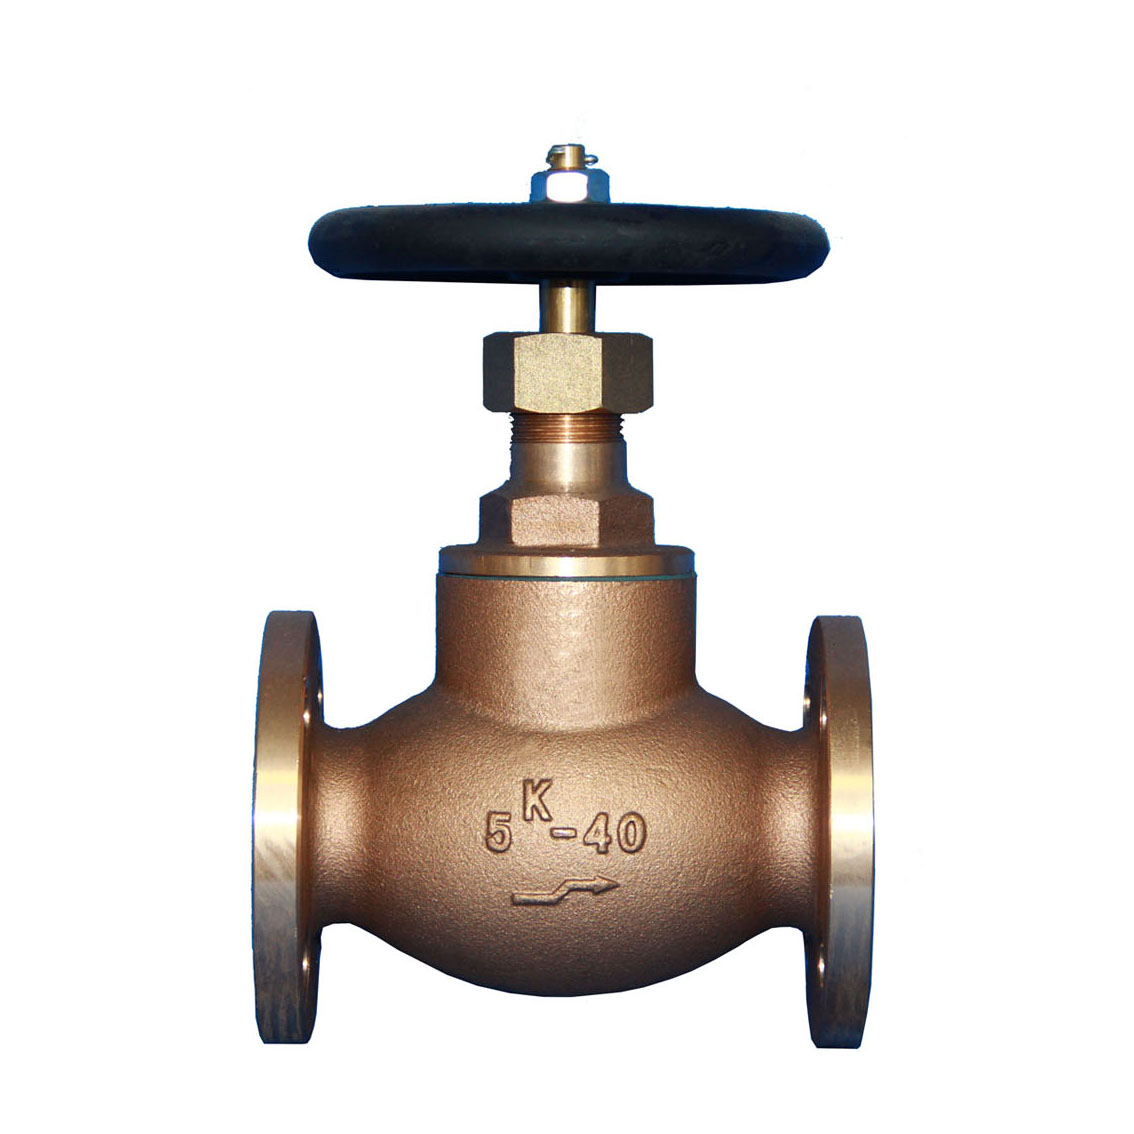 Quality Check Valves for Diverse Applications